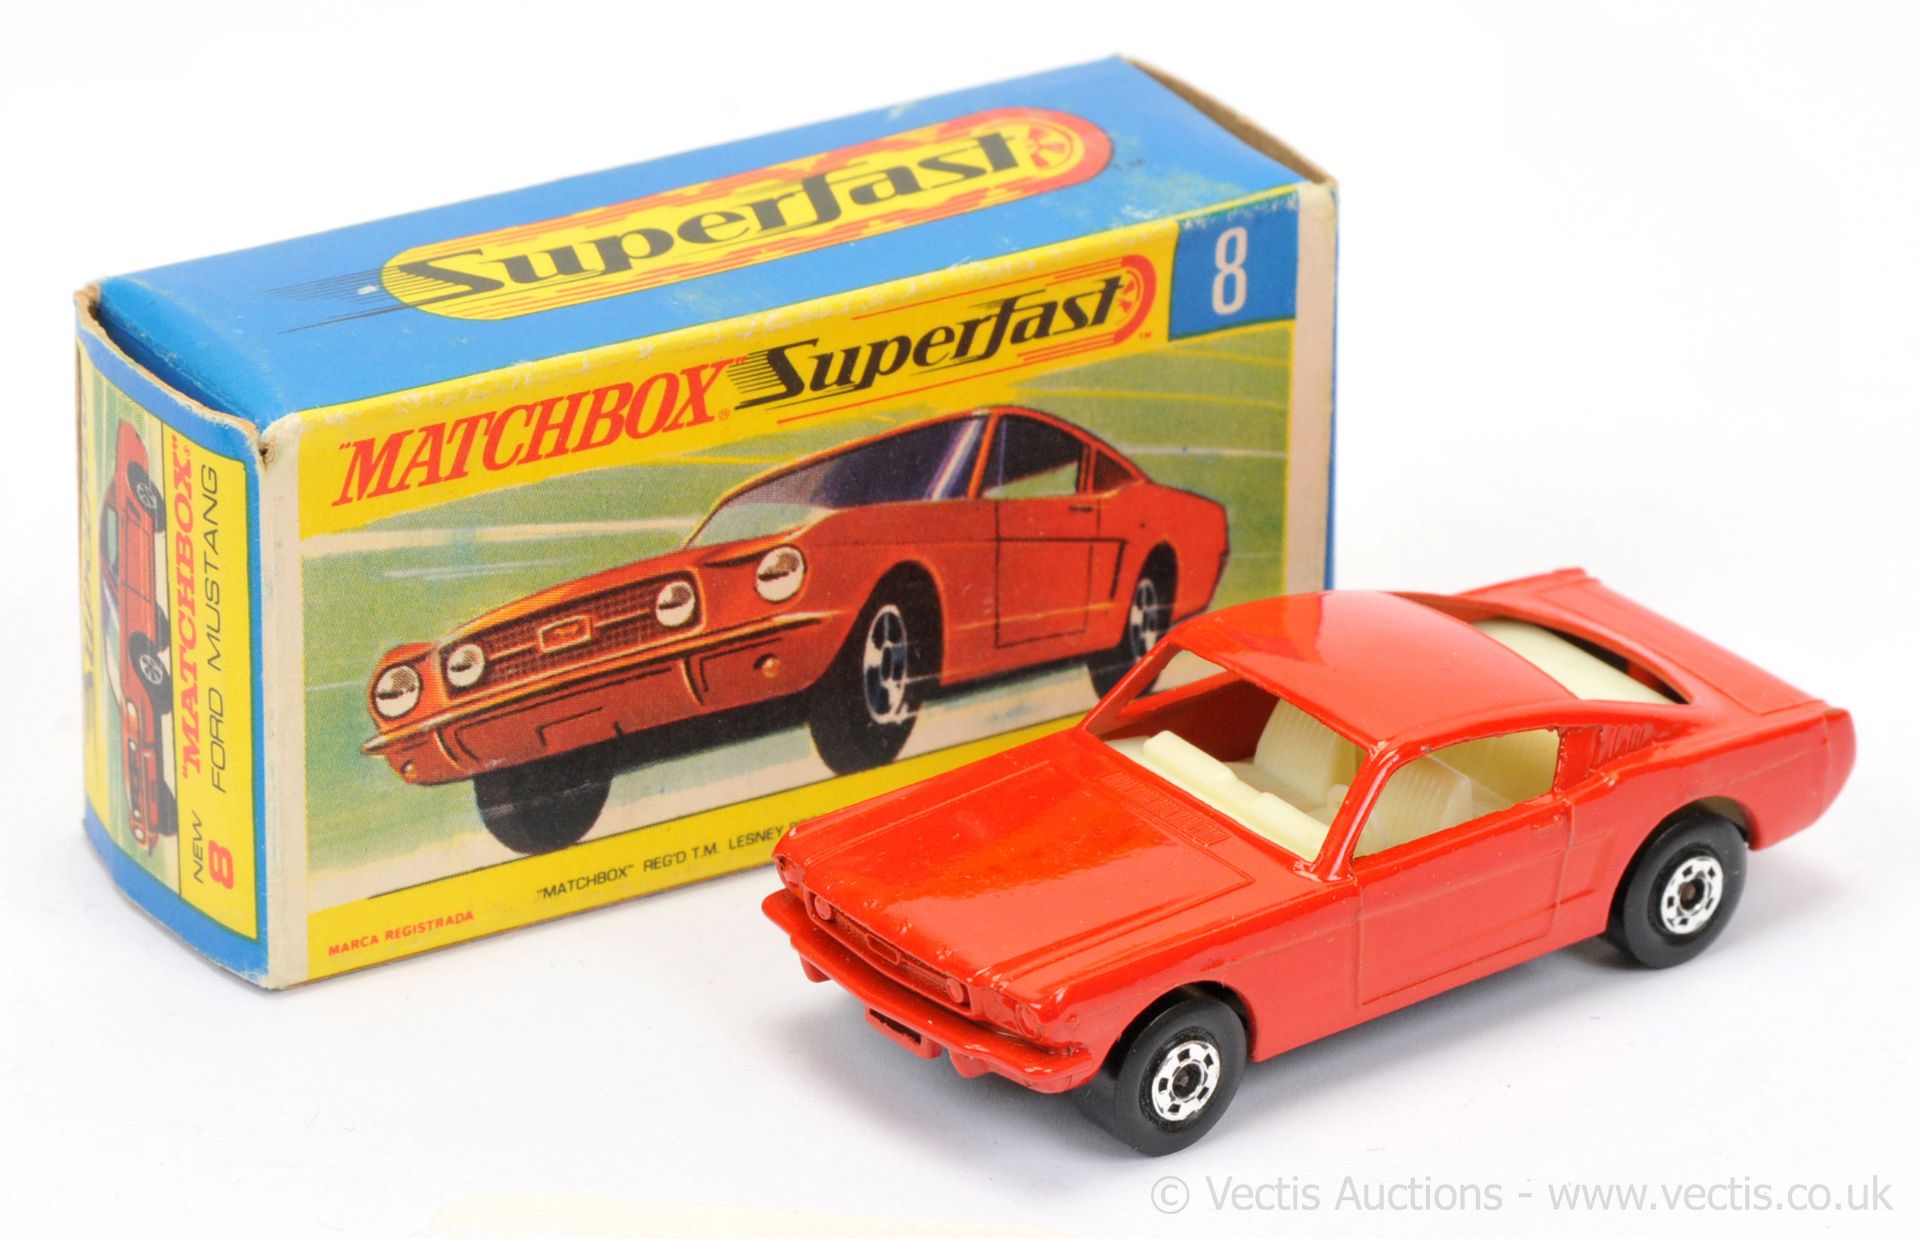 Matchbox Superfast 8a Ford Mustang - red body